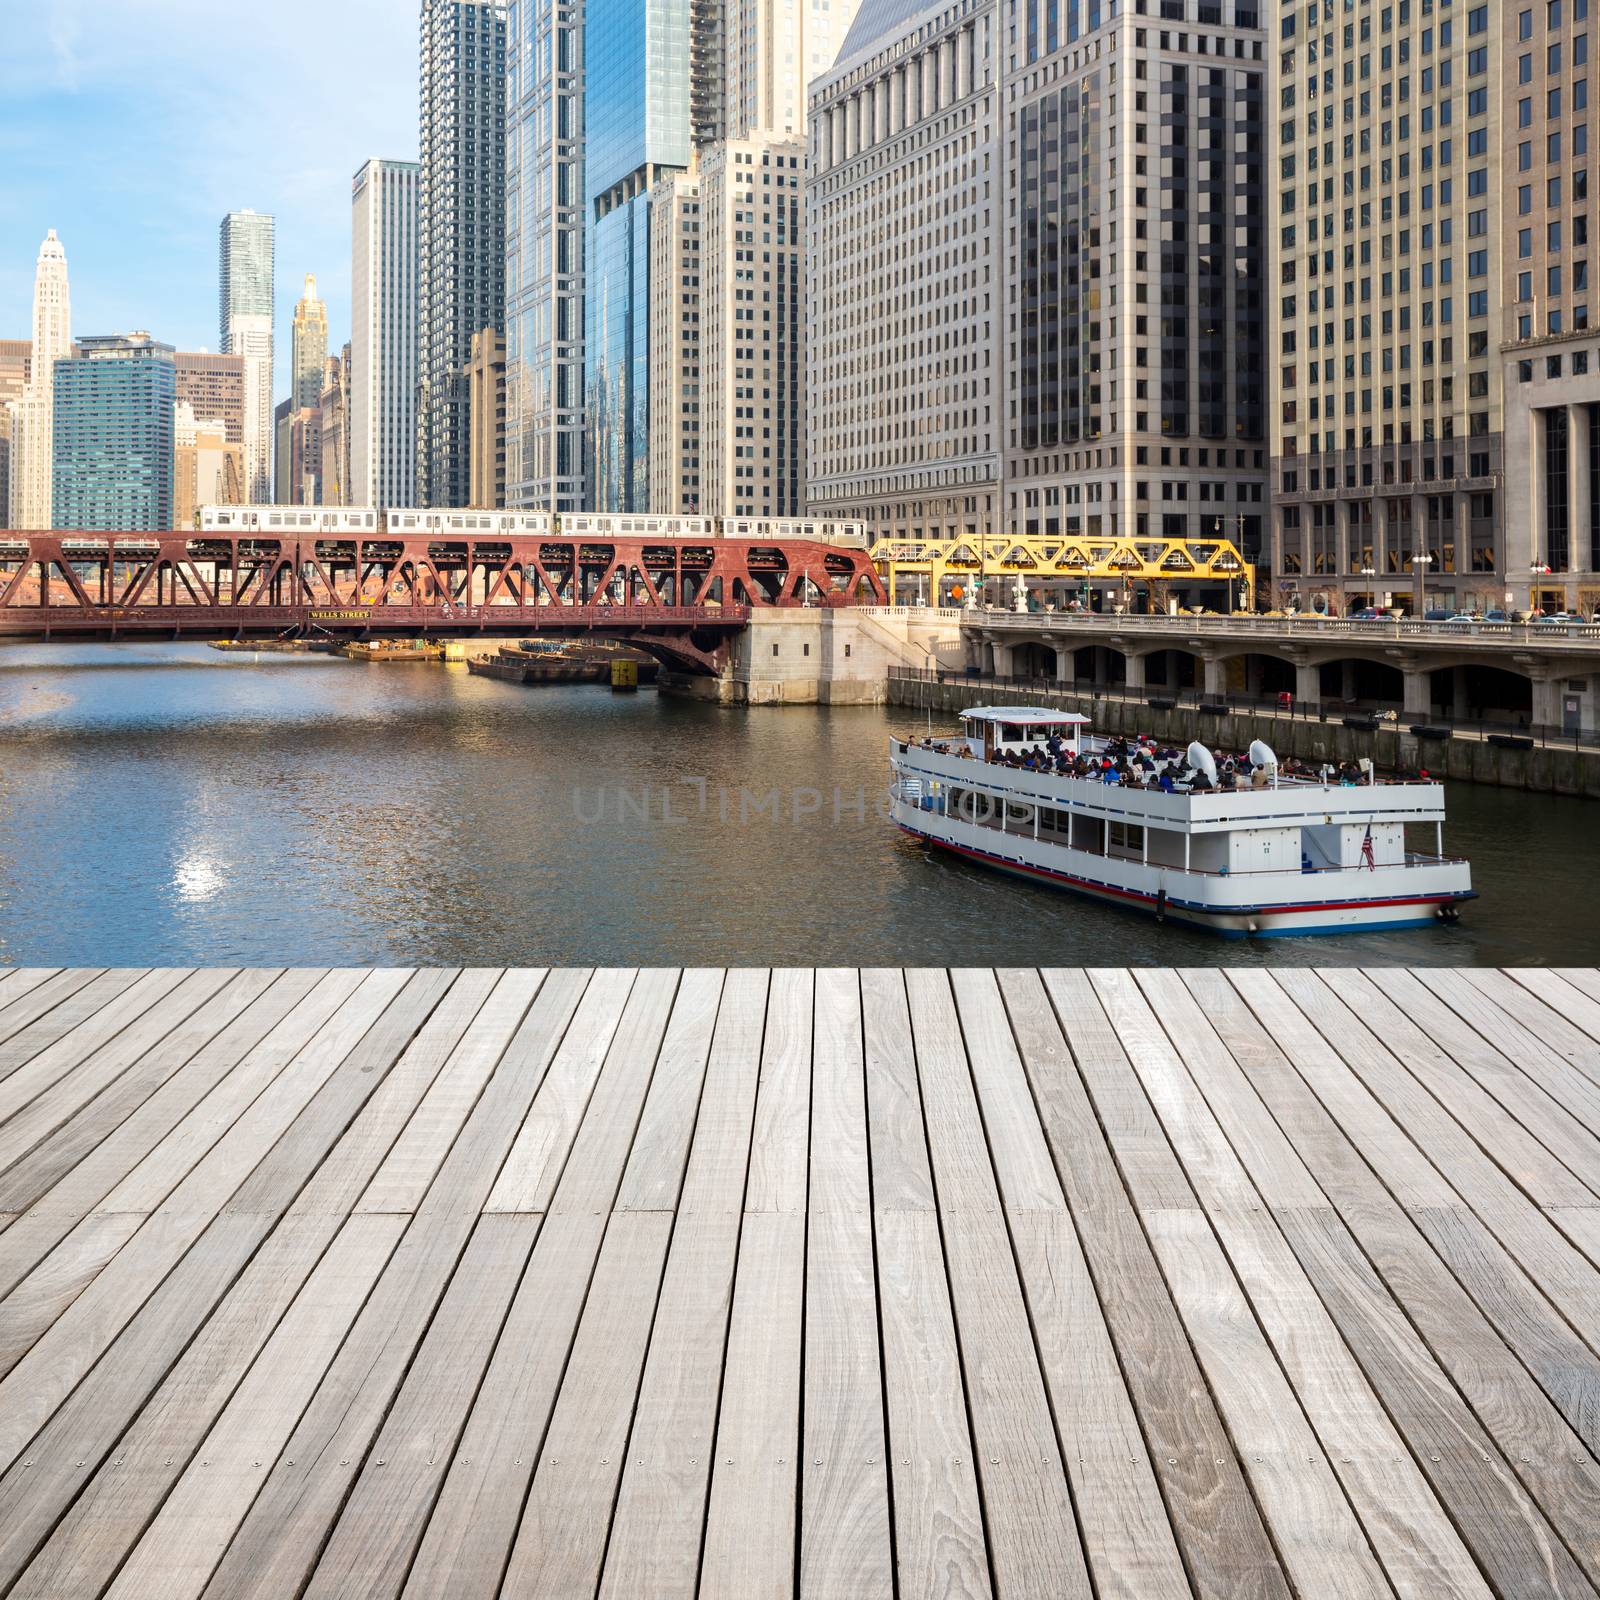 City of Chicago downtown and River with wooden terrace